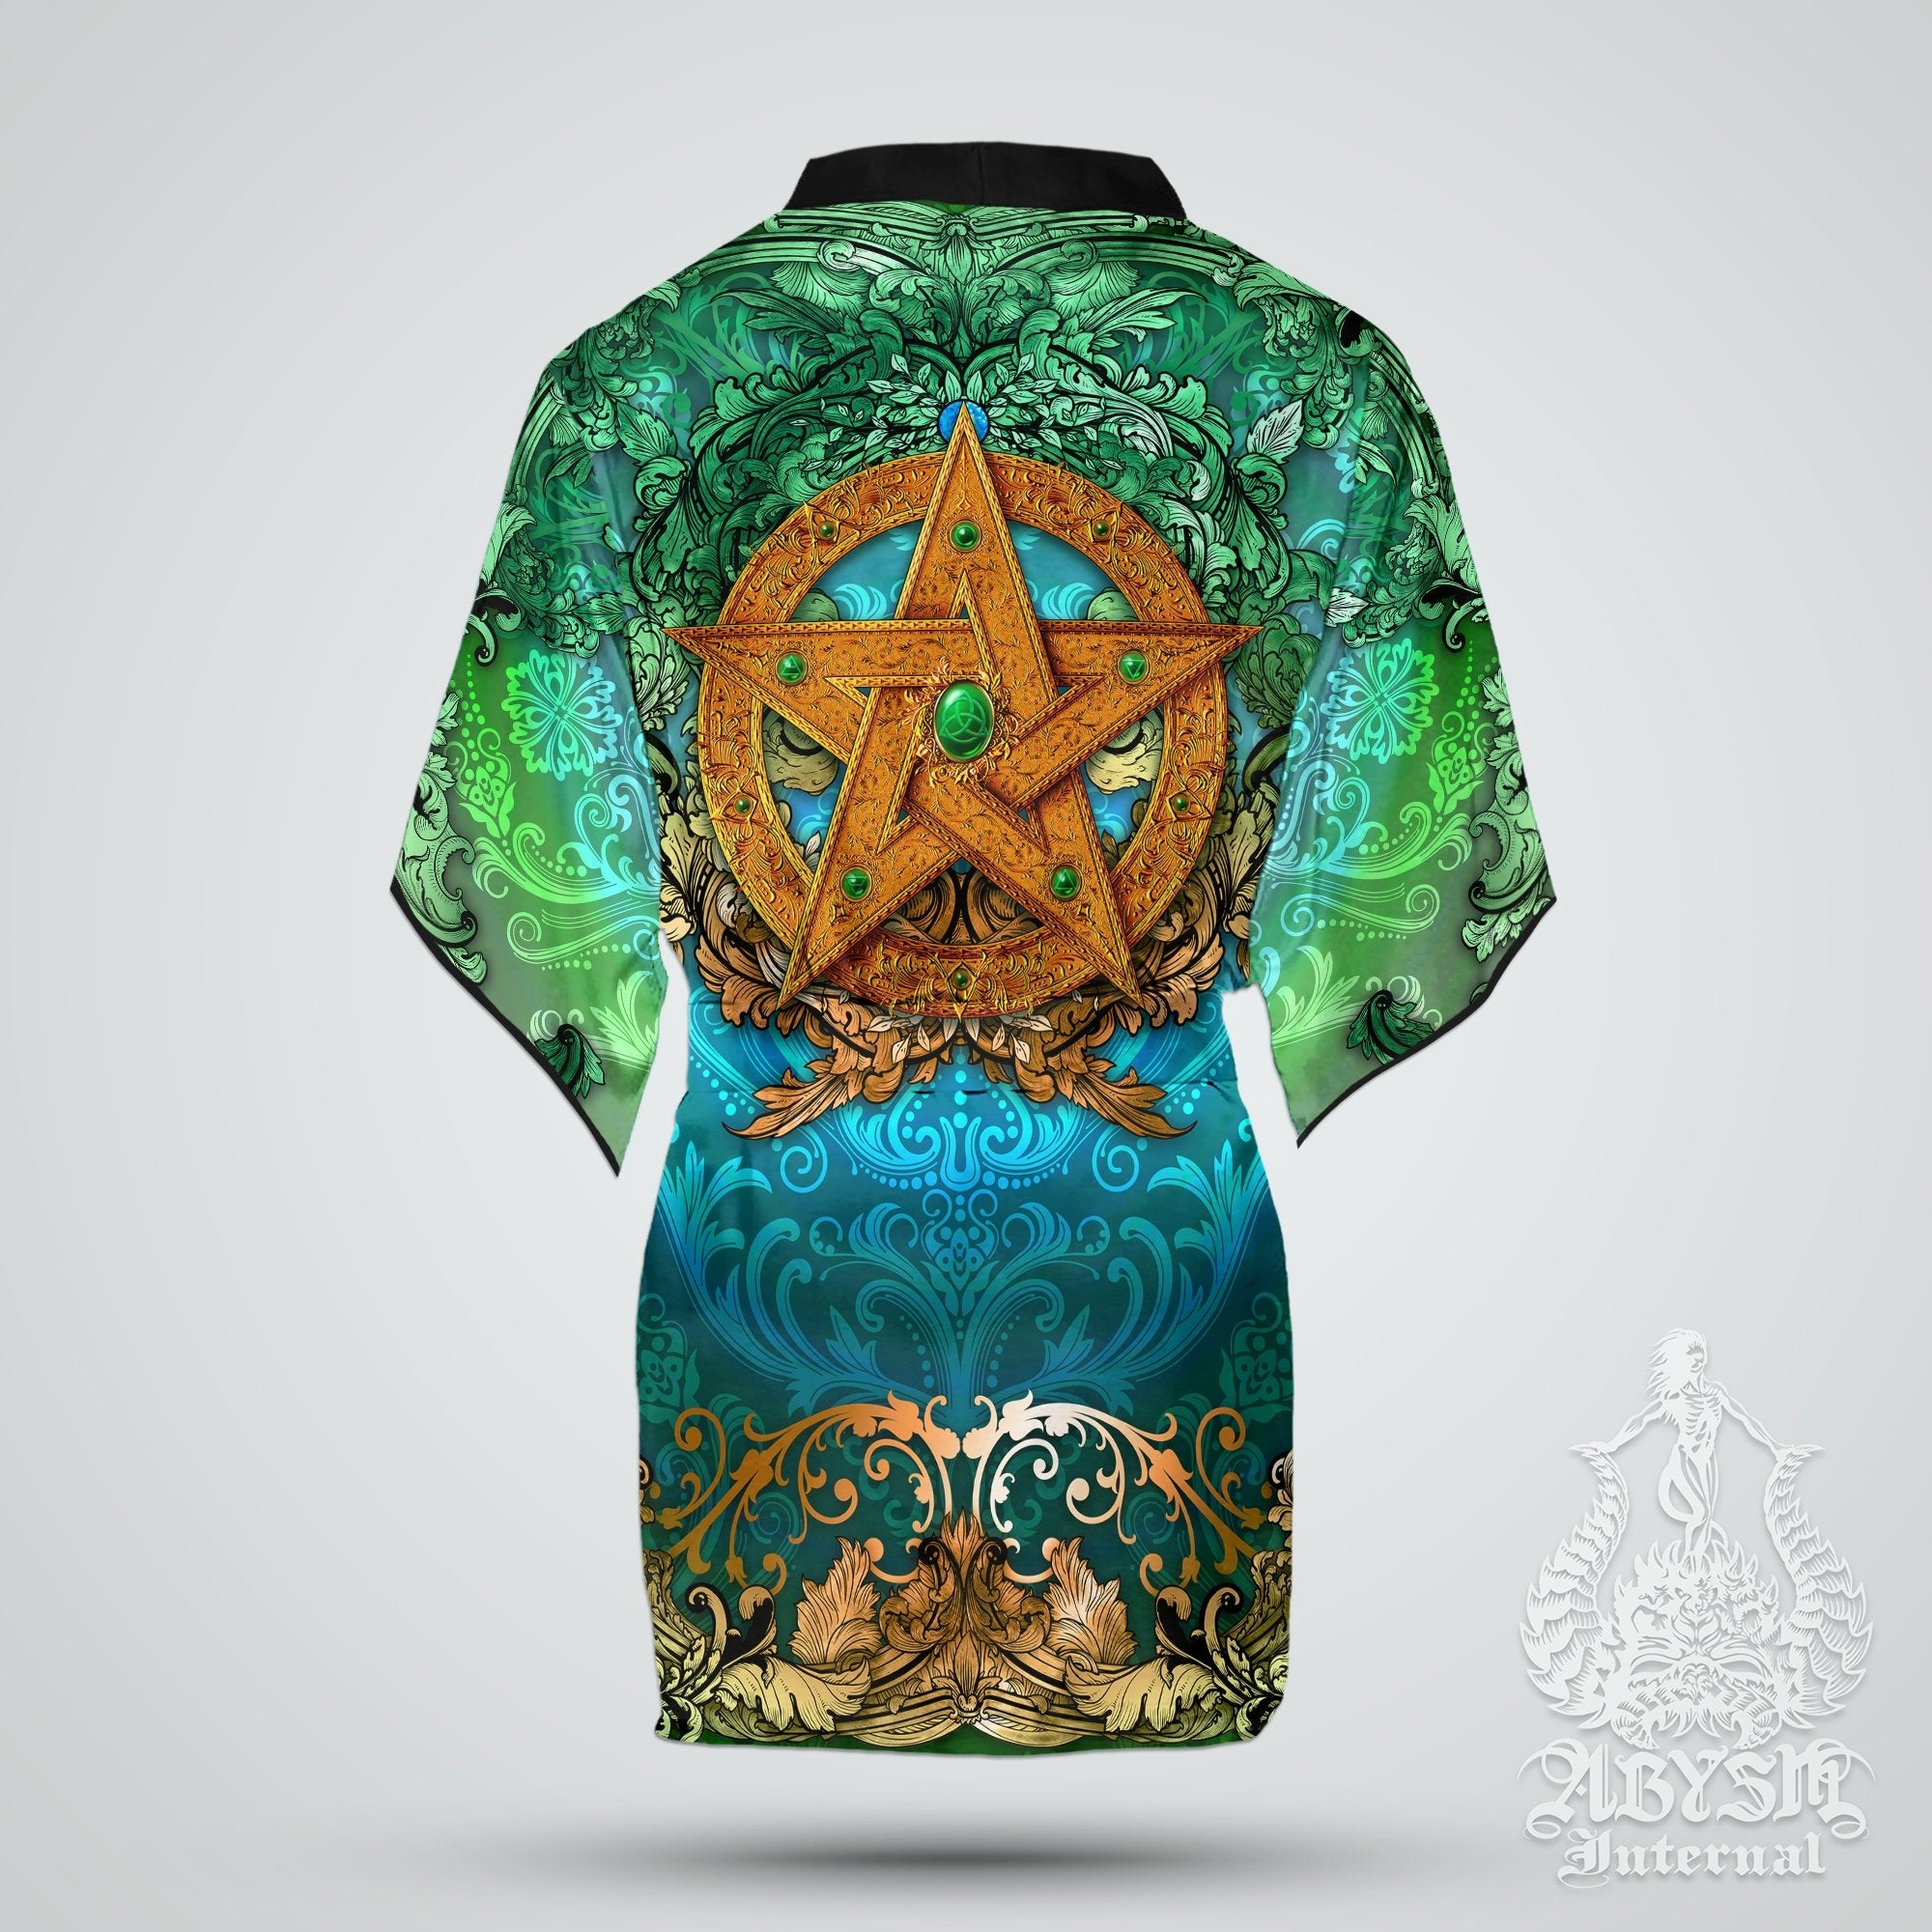 Pentacle Cover Up, Beach Outfit, Witch Party Kimono, Wicca Summer Festival Robe, Witchy Indie and Alternative Clothing, Unisex - Green - Abysm Internal